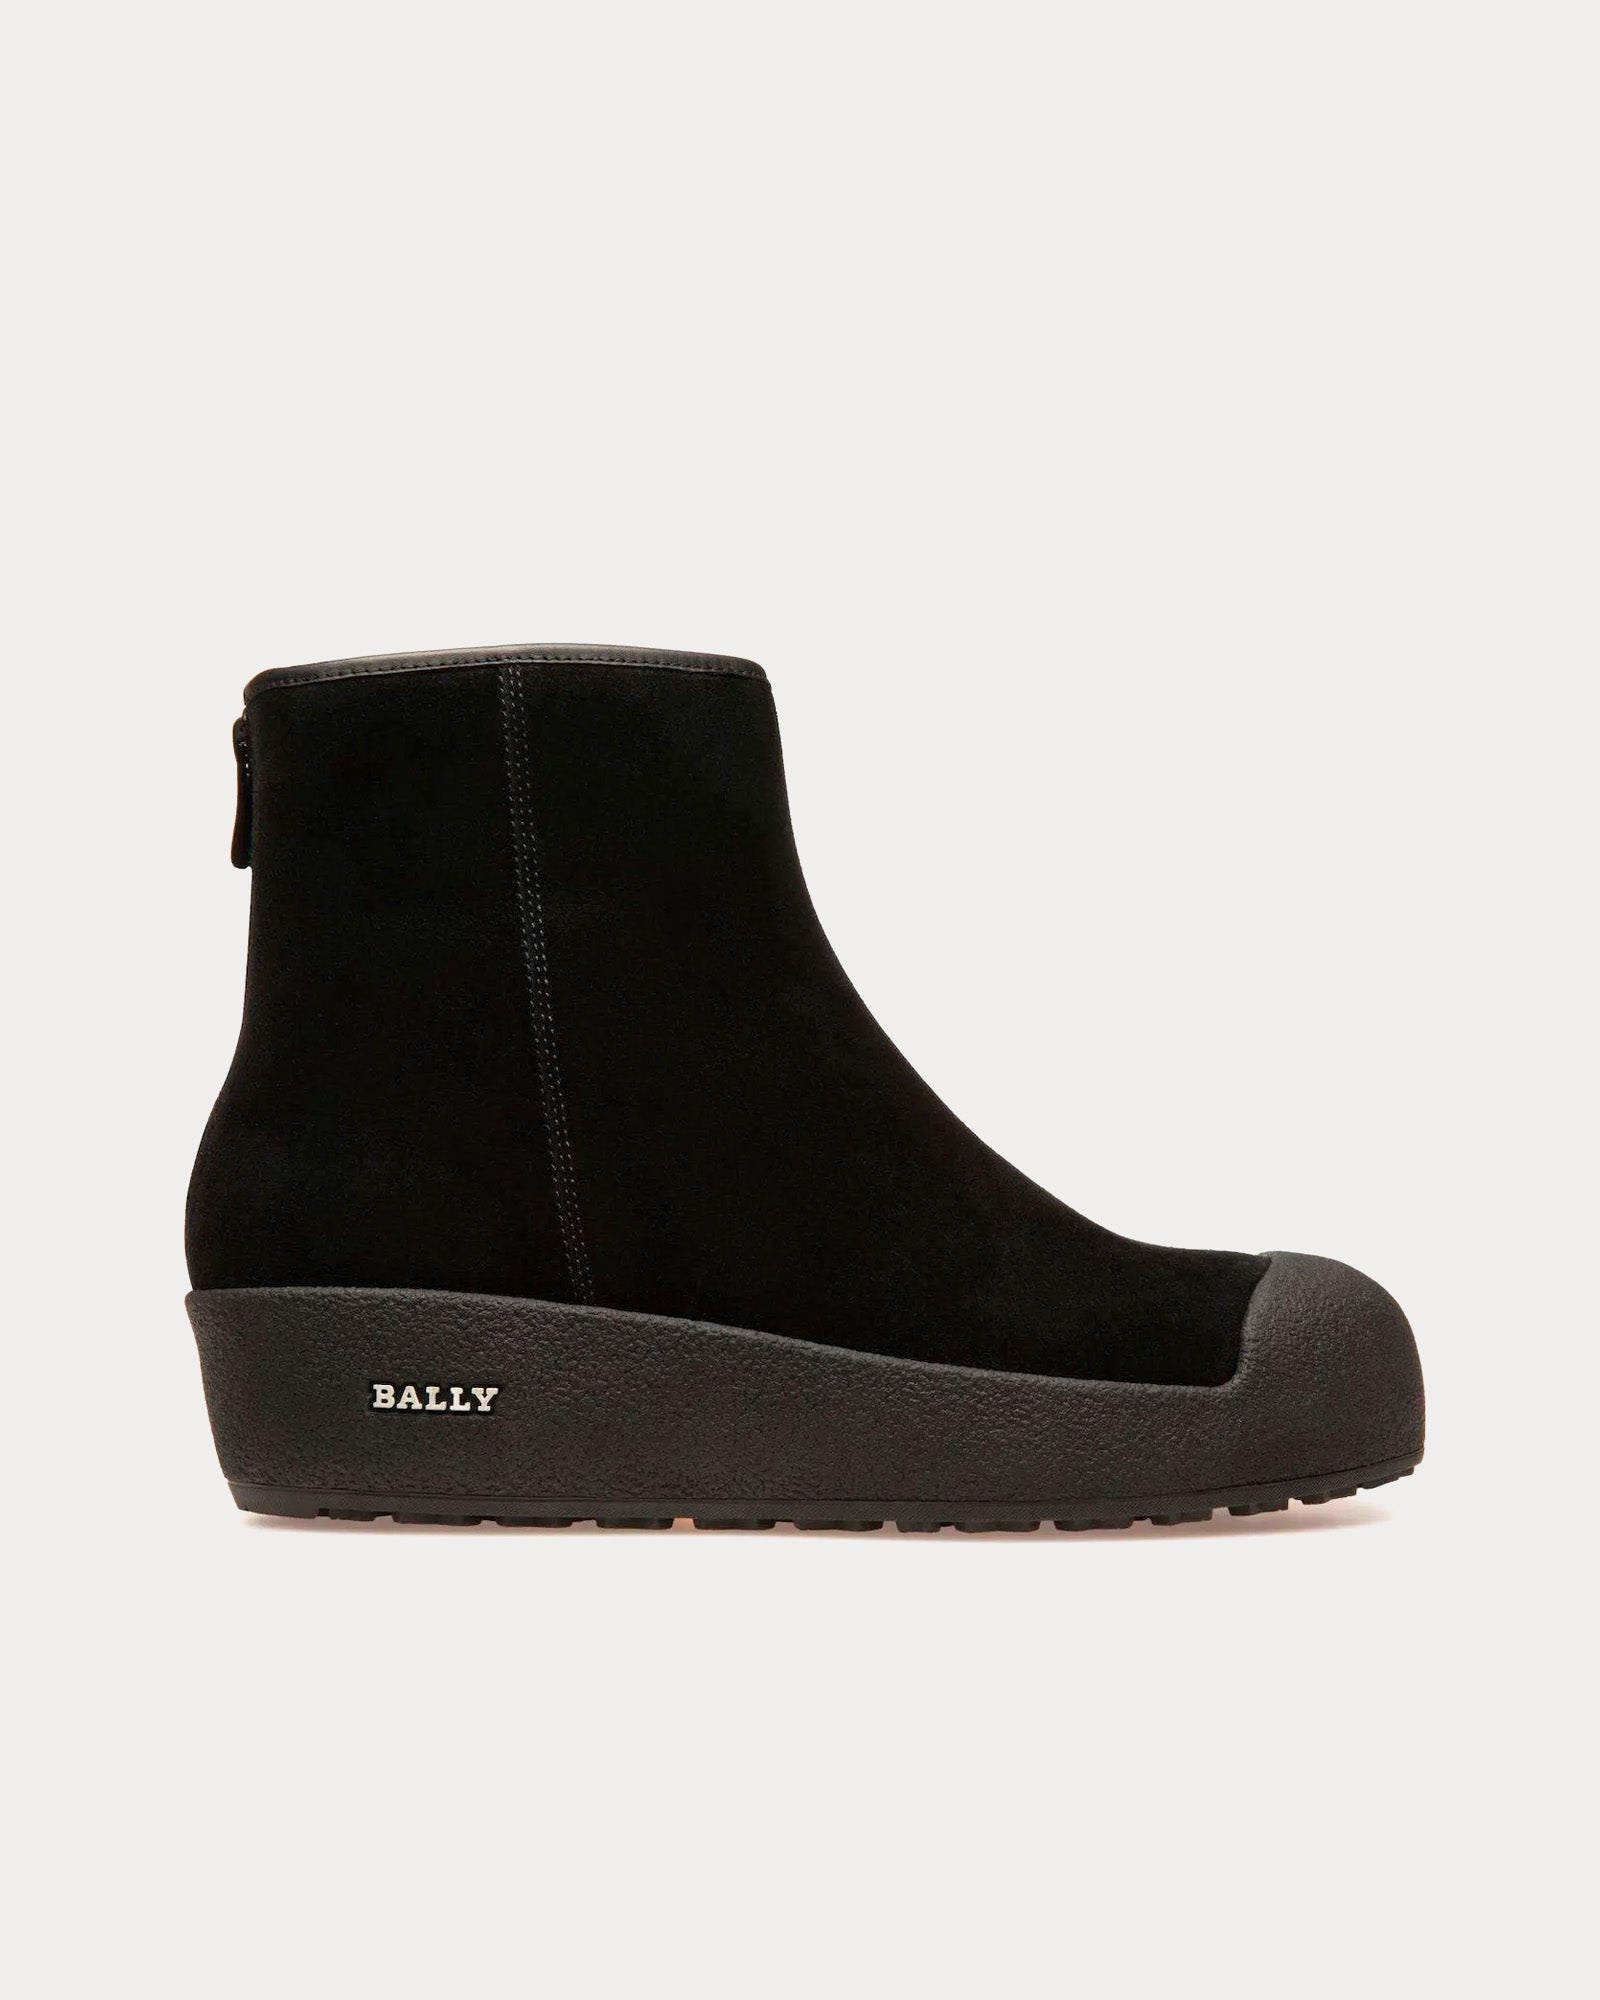 Bally - Guard II Leather Black Snow Boots